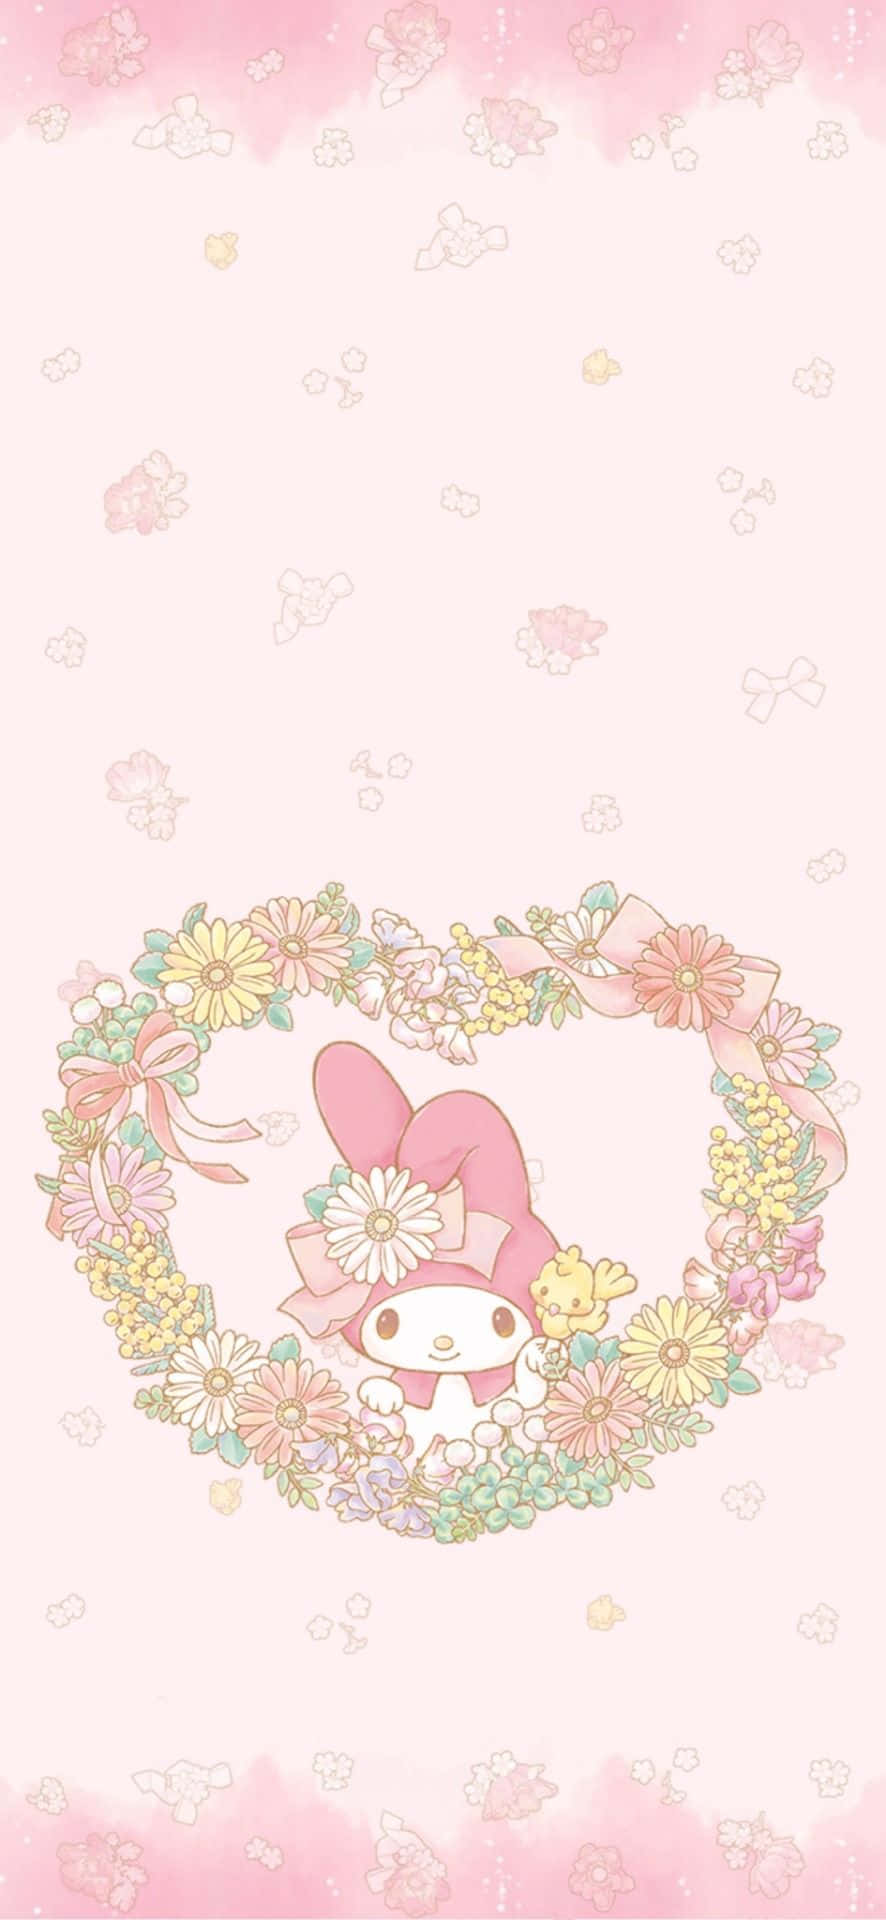 Cute My Melody In Floral Heart Frame Wallpaper